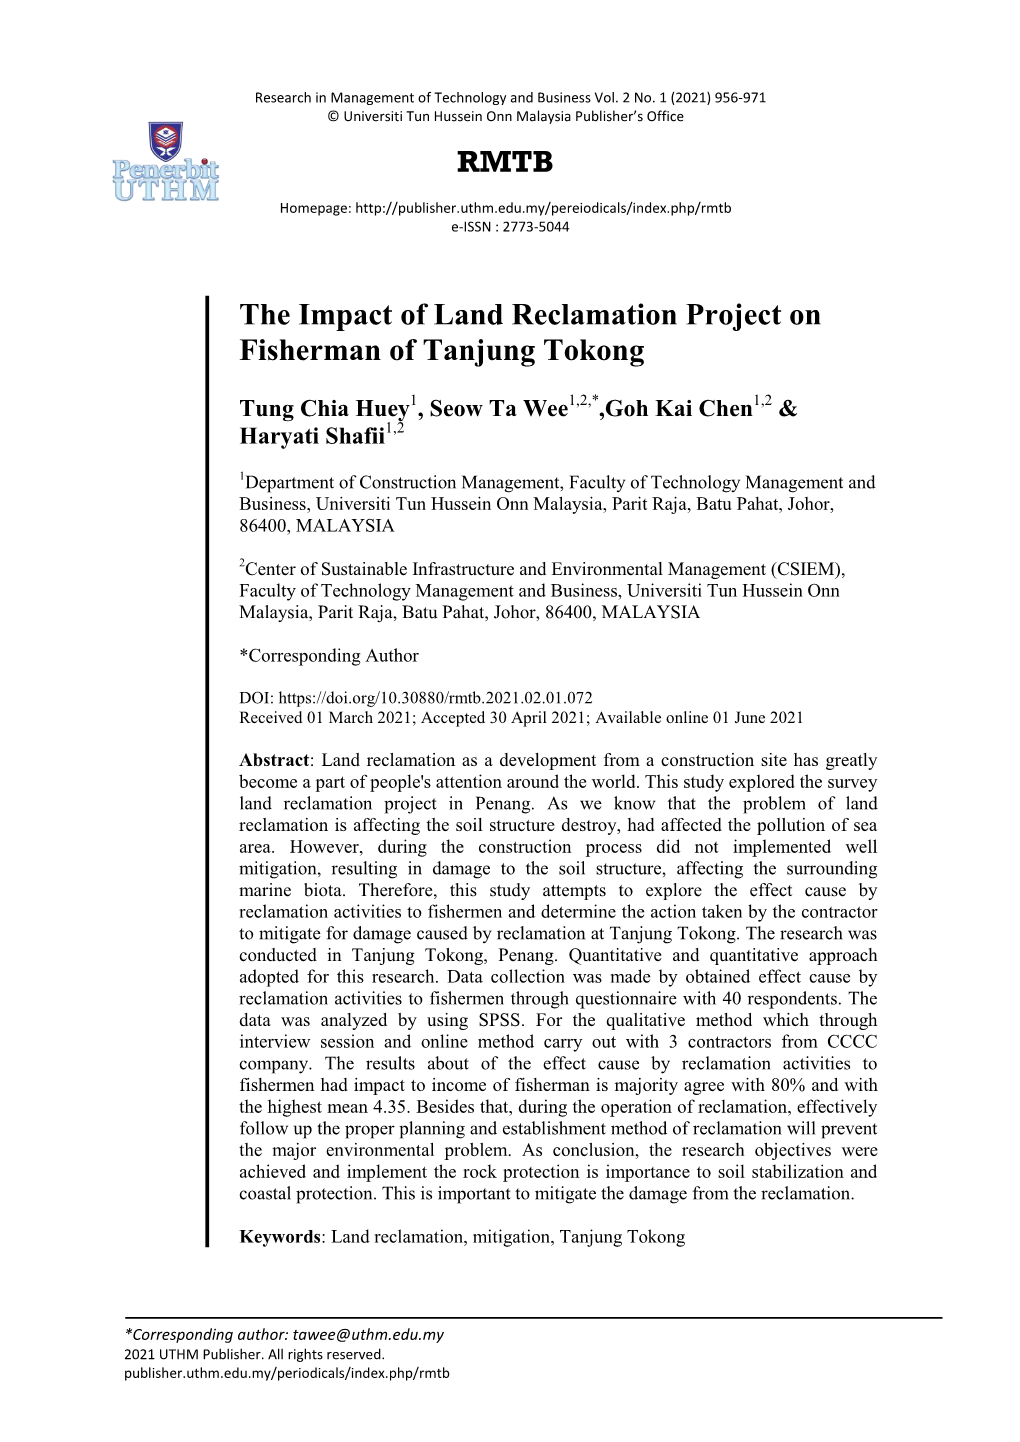 RMTB the Impact of Land Reclamation Project on Fisherman of Tanjung Tokong